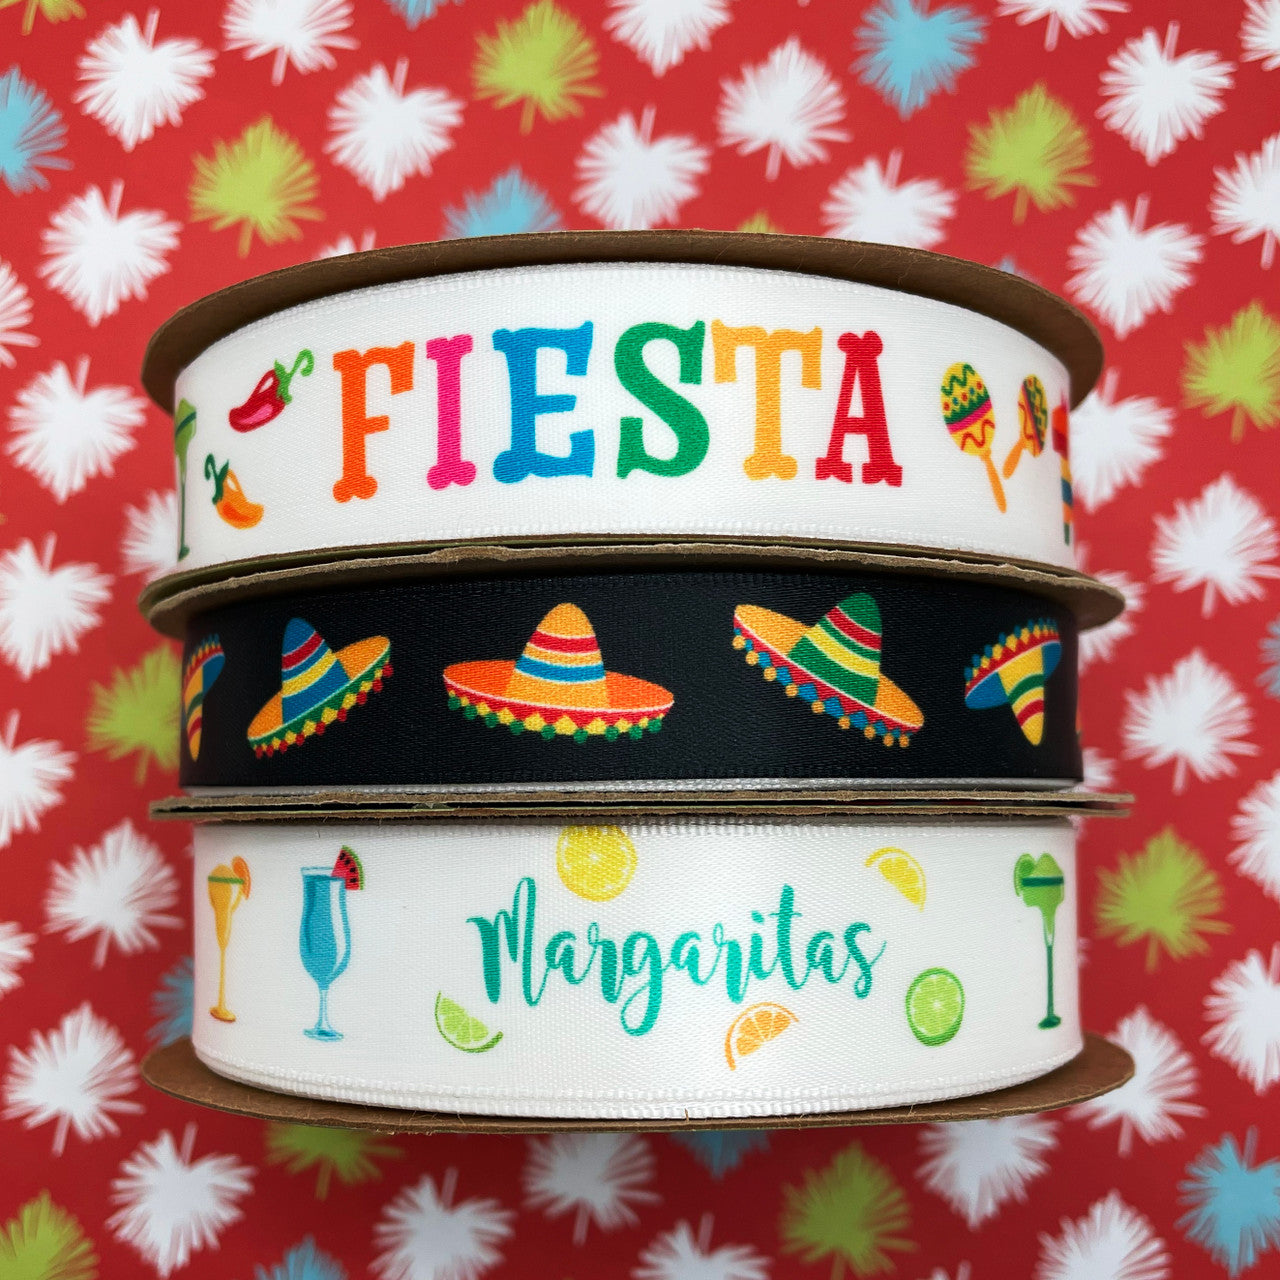 Mix and match our Margaritas ribbon with Fiesta and Sombrero ribbons to complete the party theme!